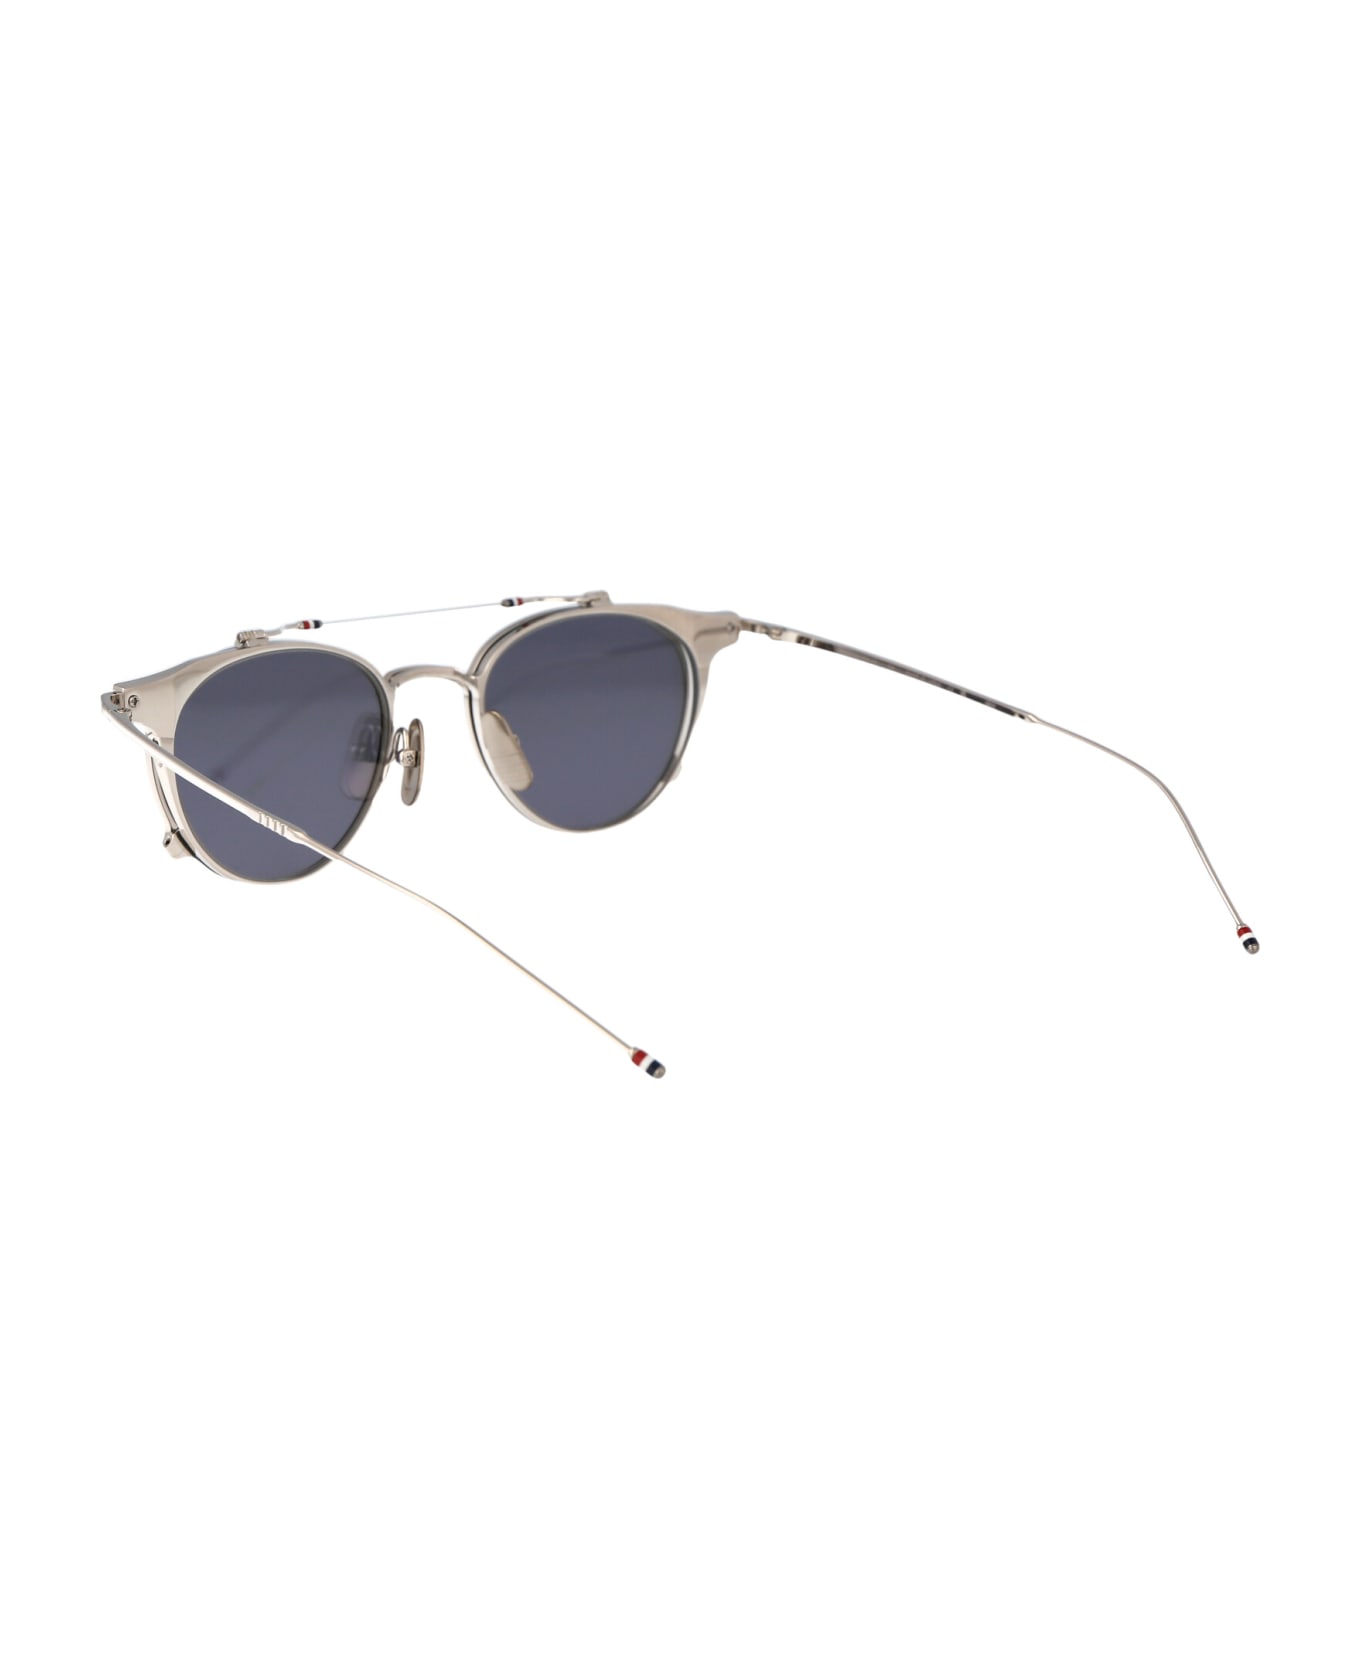 Thom Browne Ues814a-g0001-045-49 Sunglasses - 045 SILVER サングラス